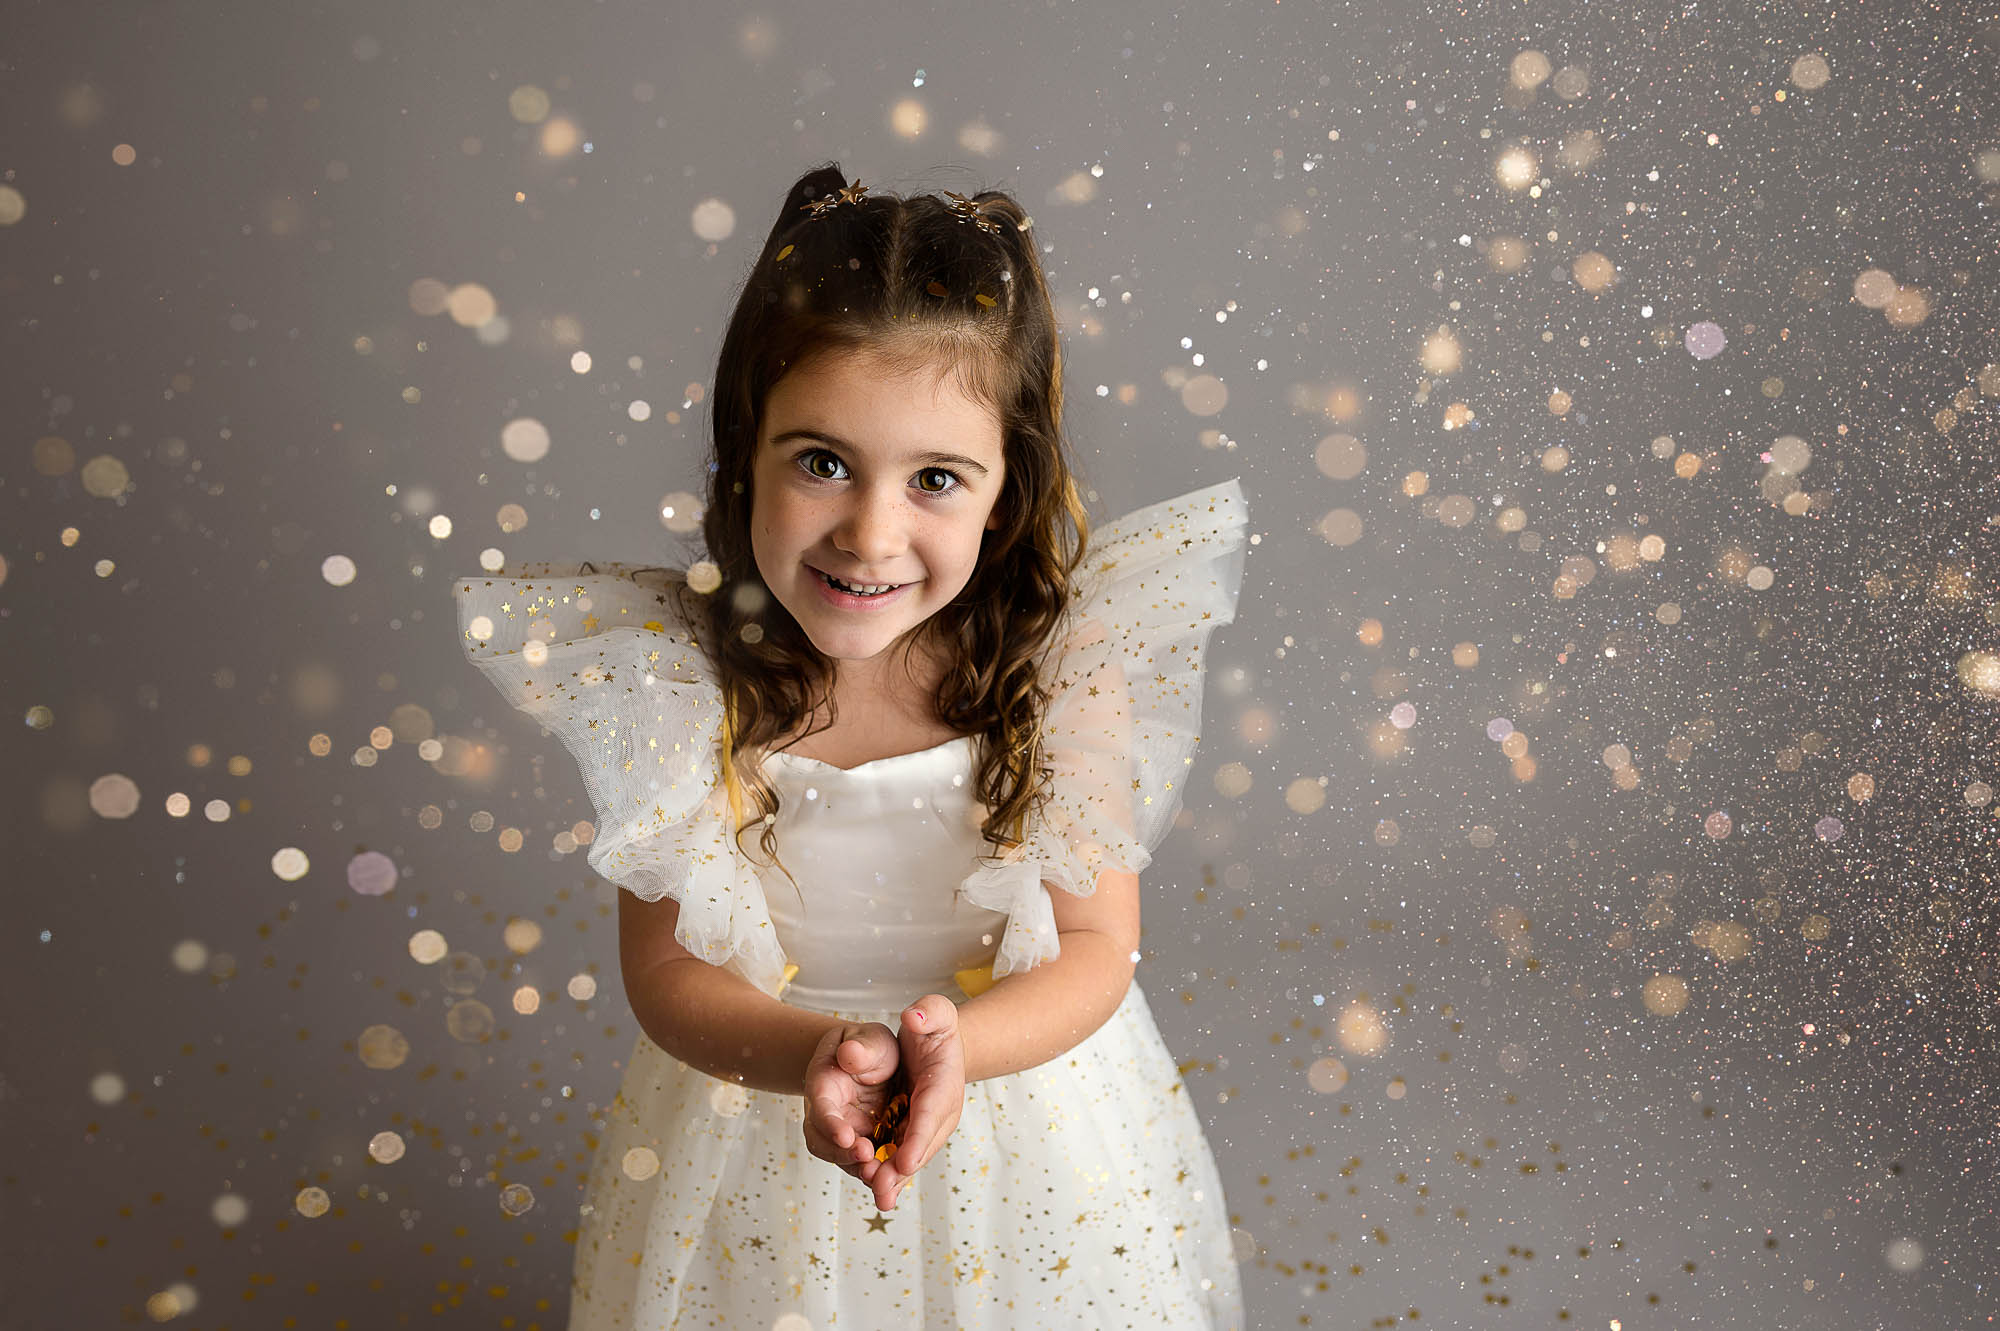 a 4 year old is wearing a white and gold sparkly dress. She is throwing gold glitter with a gray background.